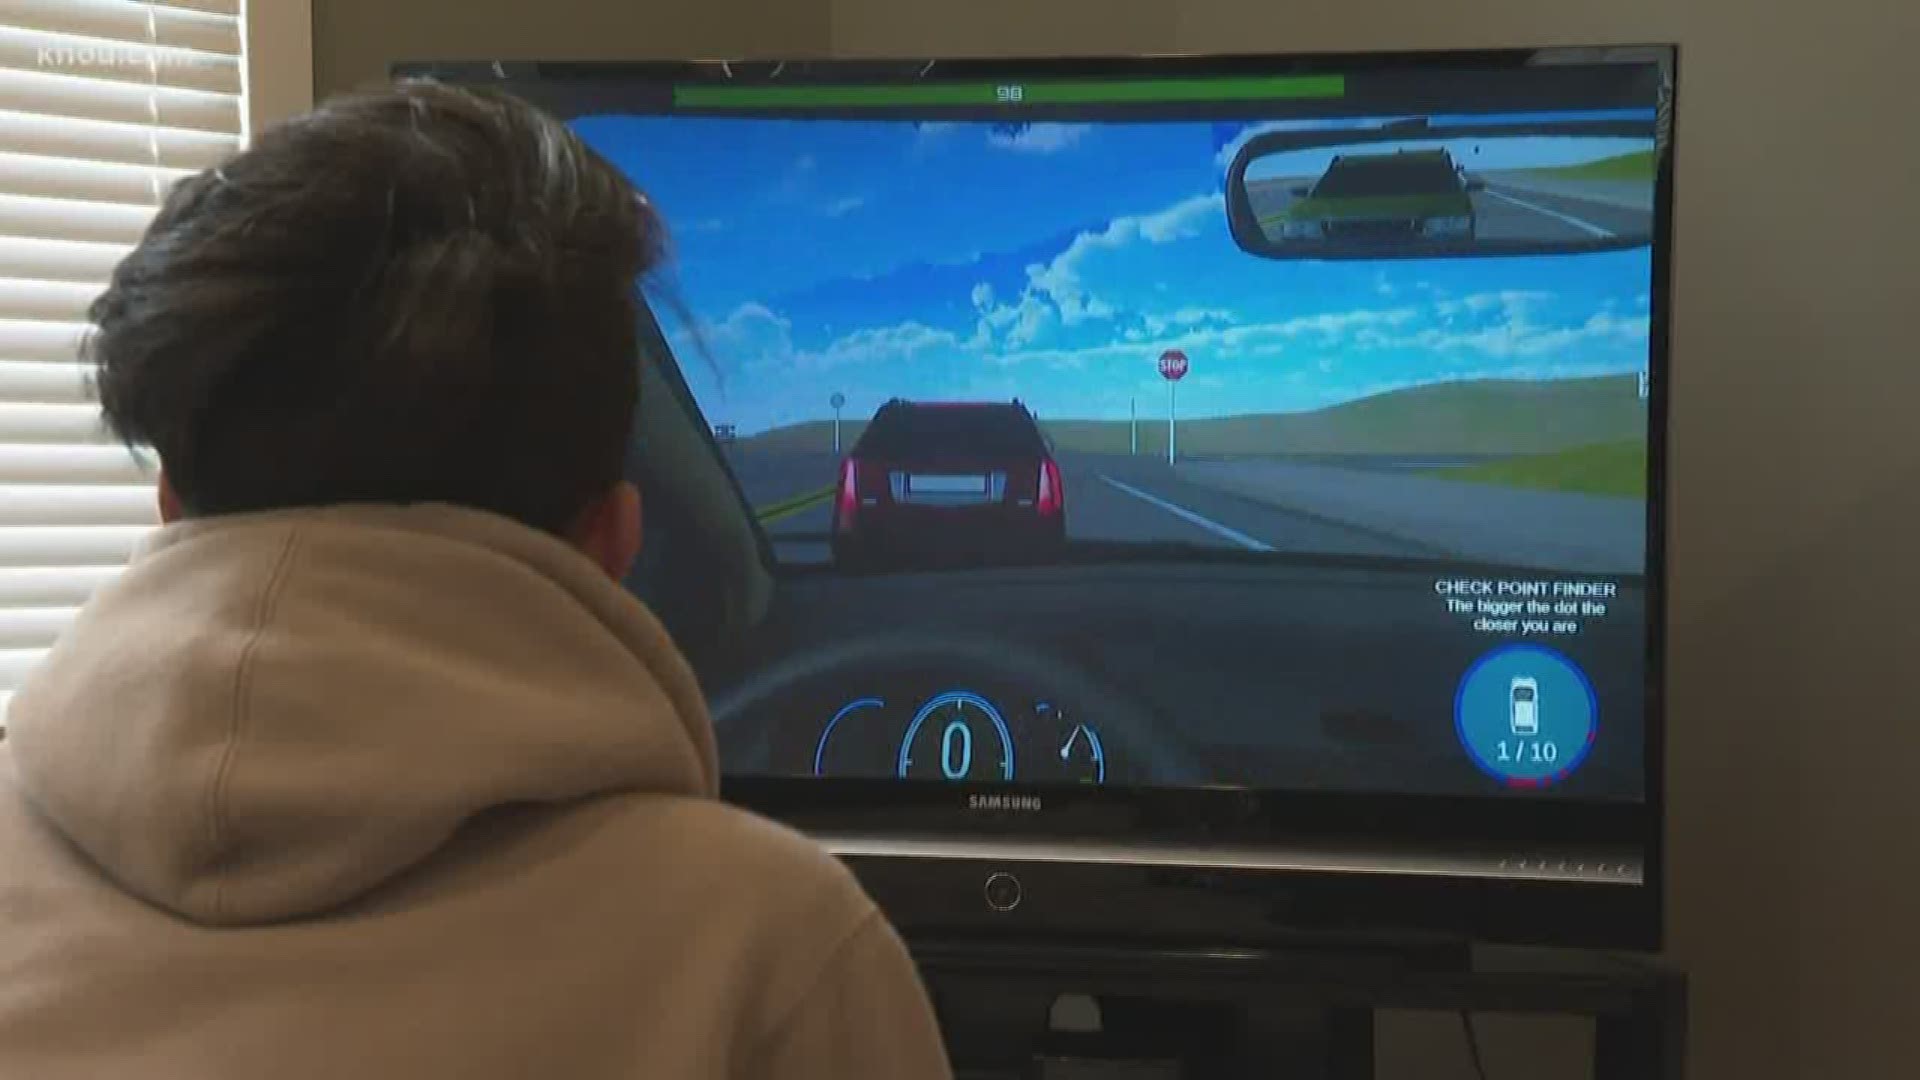 For the next 99 days, more than 1,000 people on average will be killed in crashes involving a teen driver. A new program using the Xbox could curb the statistic.